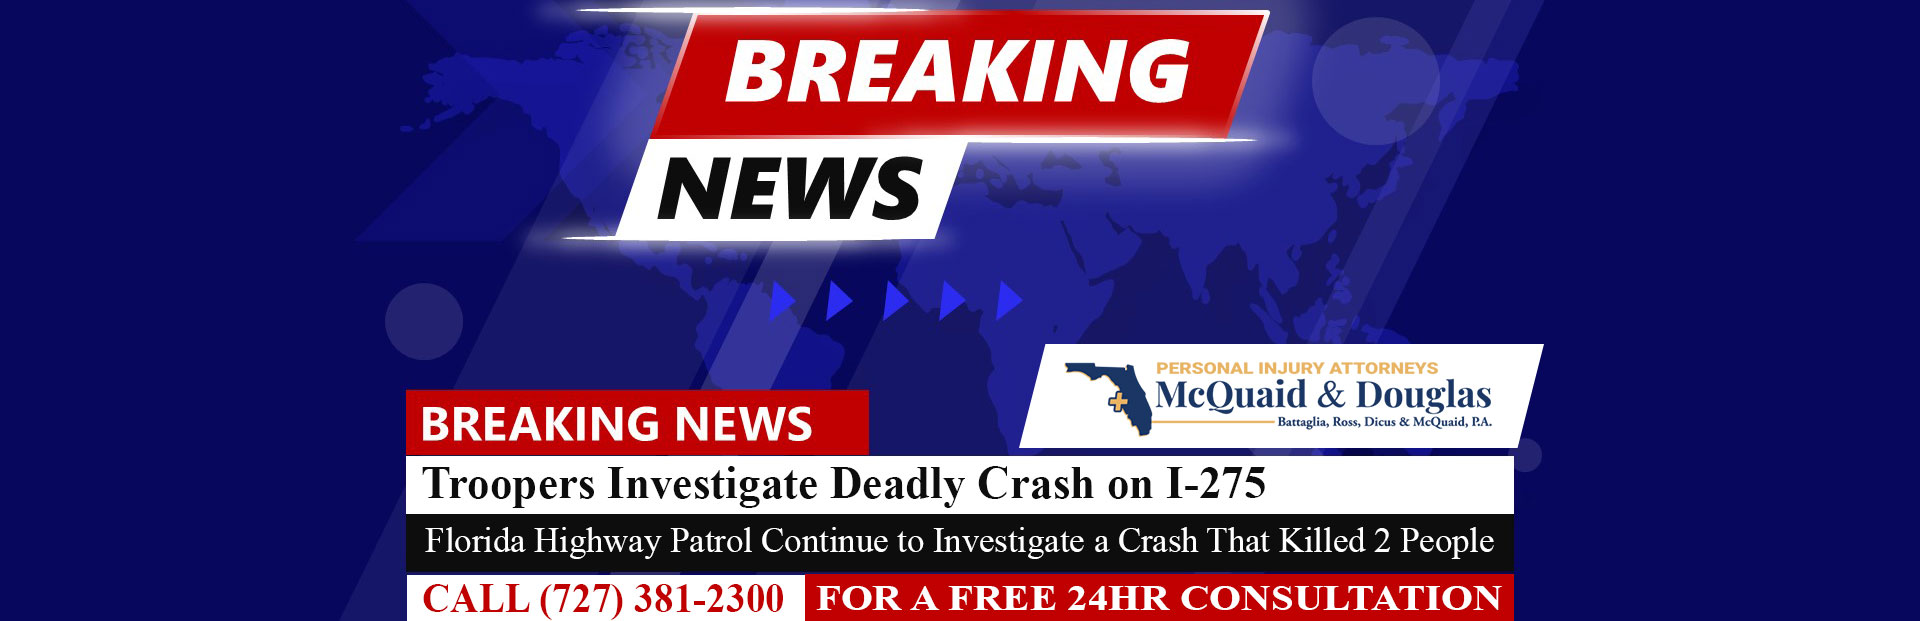 [7-18-22] Troopers Investigate Deadly Crash on I-275 at the Kennedy Boulevard Exit